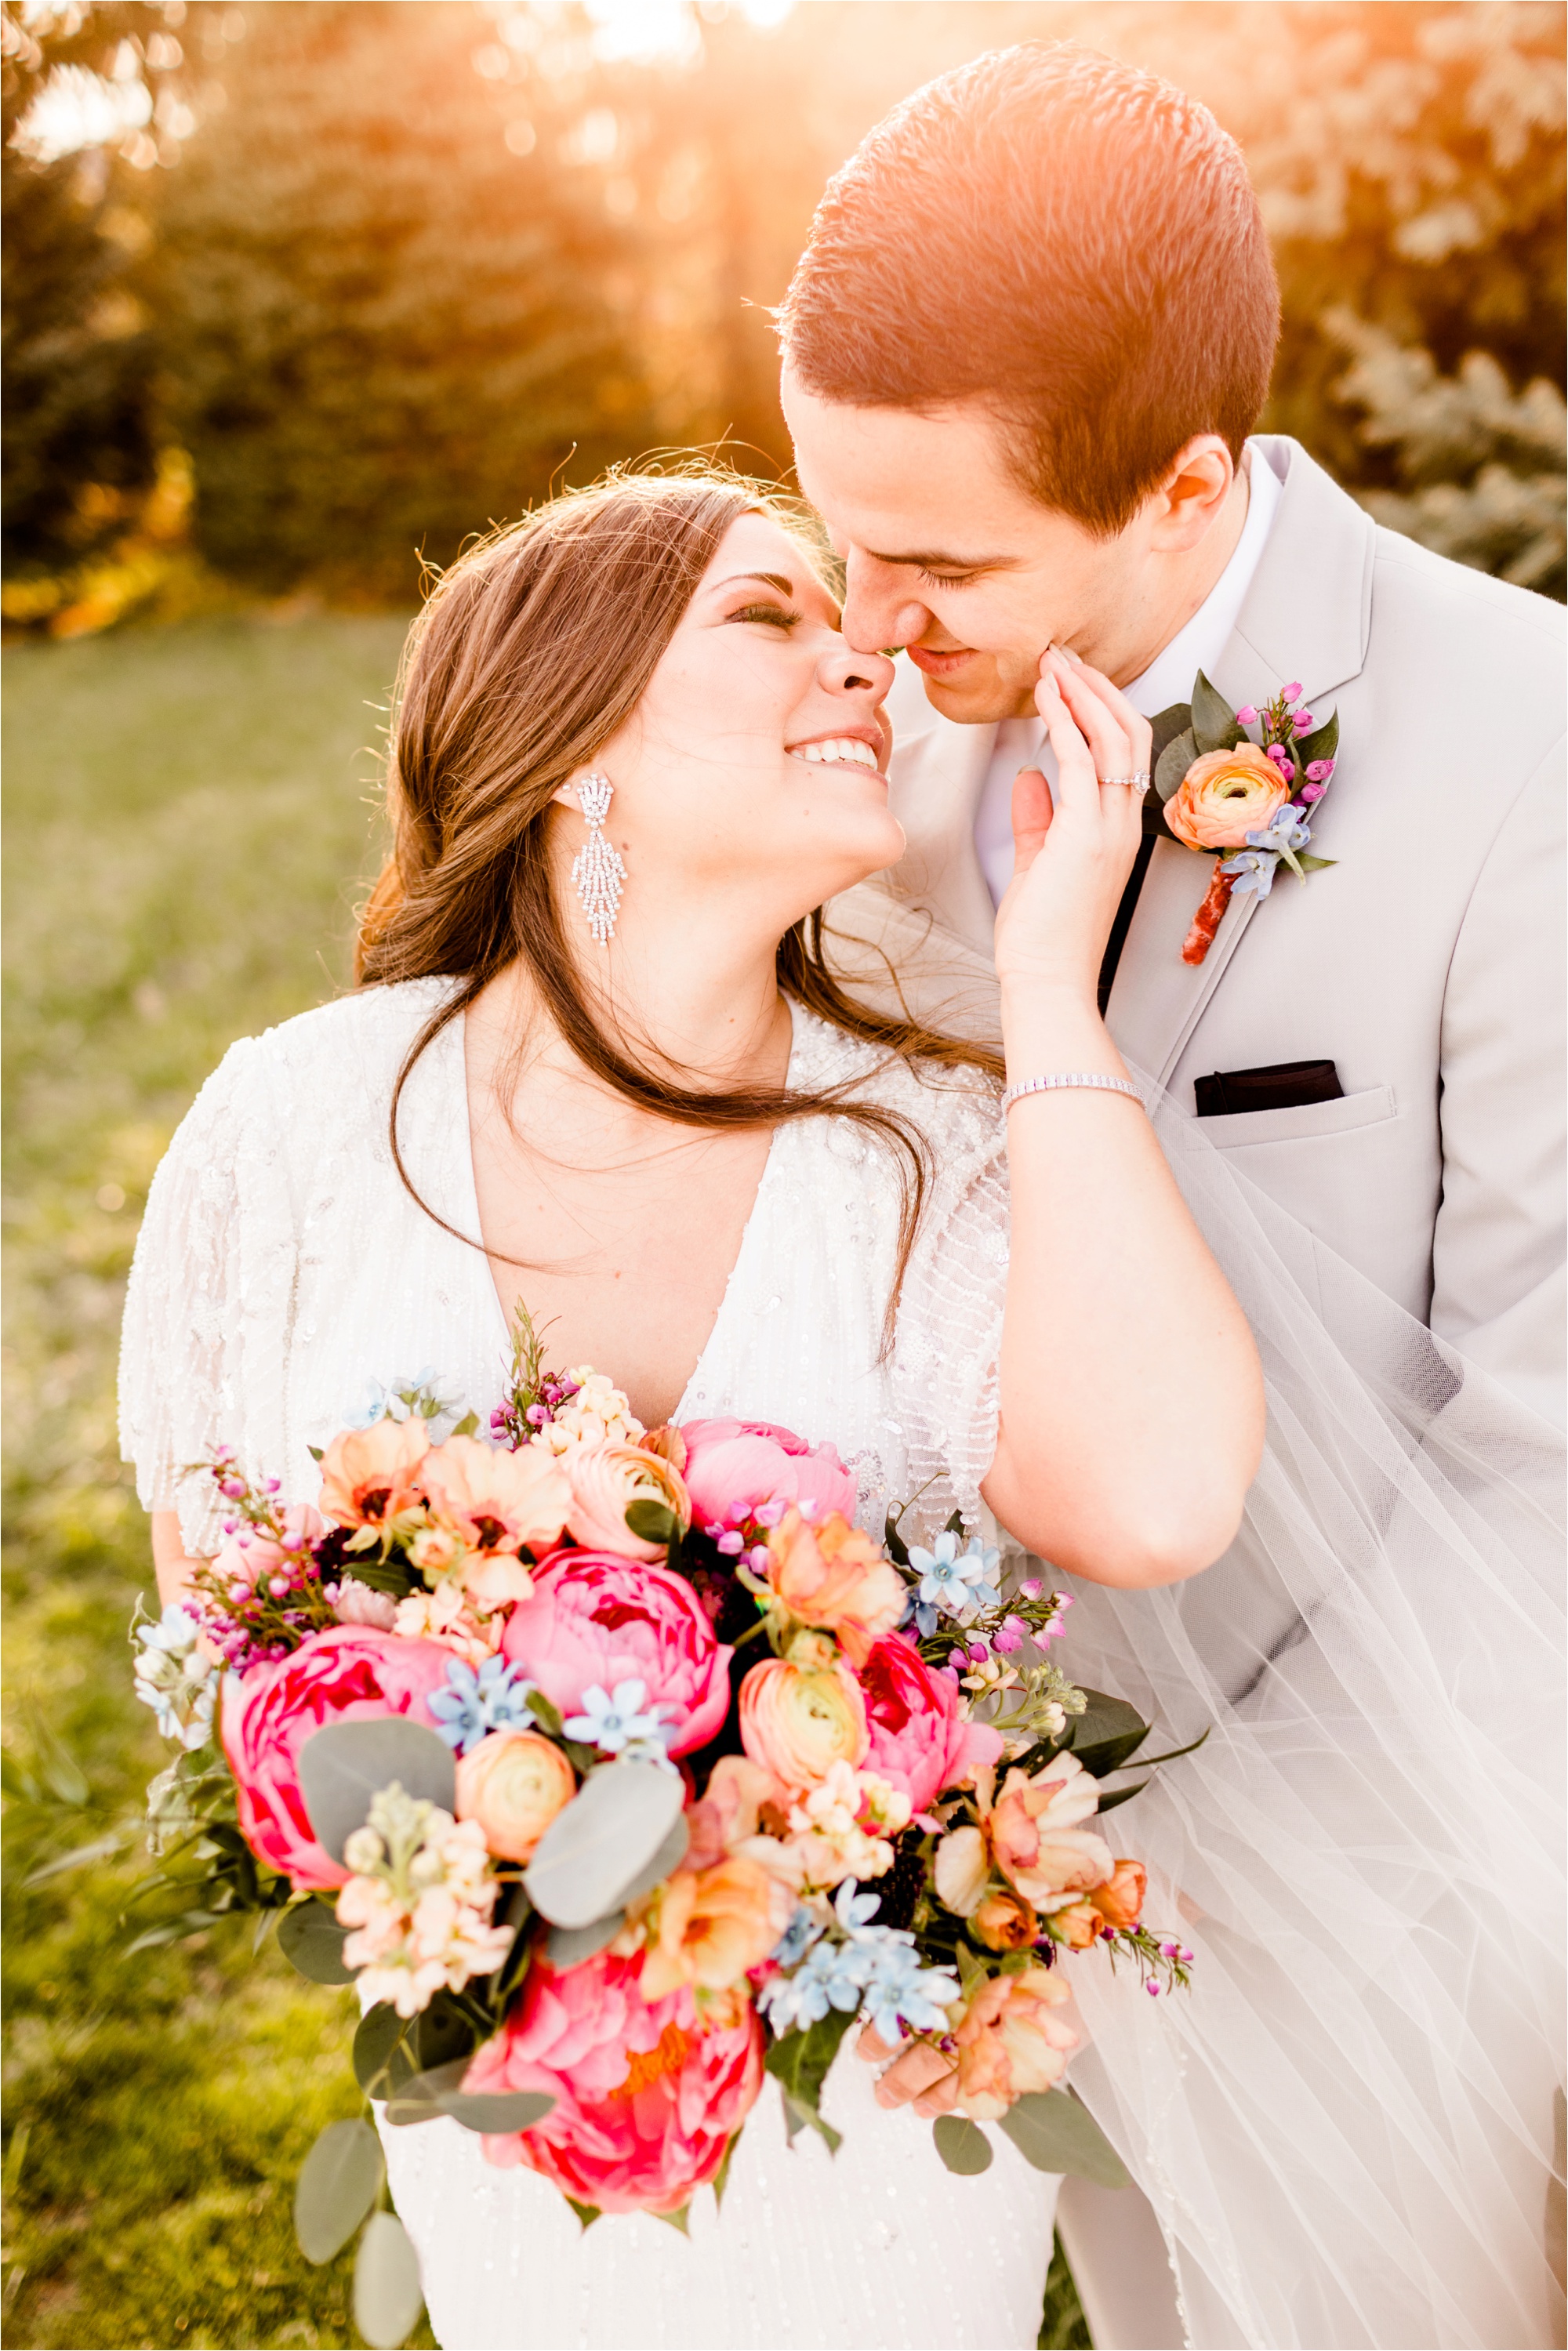 Caitlin and Luke Photography, Illinois Wedding Photographers, Champaign Wedding Photographers, Bloomington Normal Wedding Photographers, Romantic Red and Pink Sunset Styled Shoot_9552.jpg